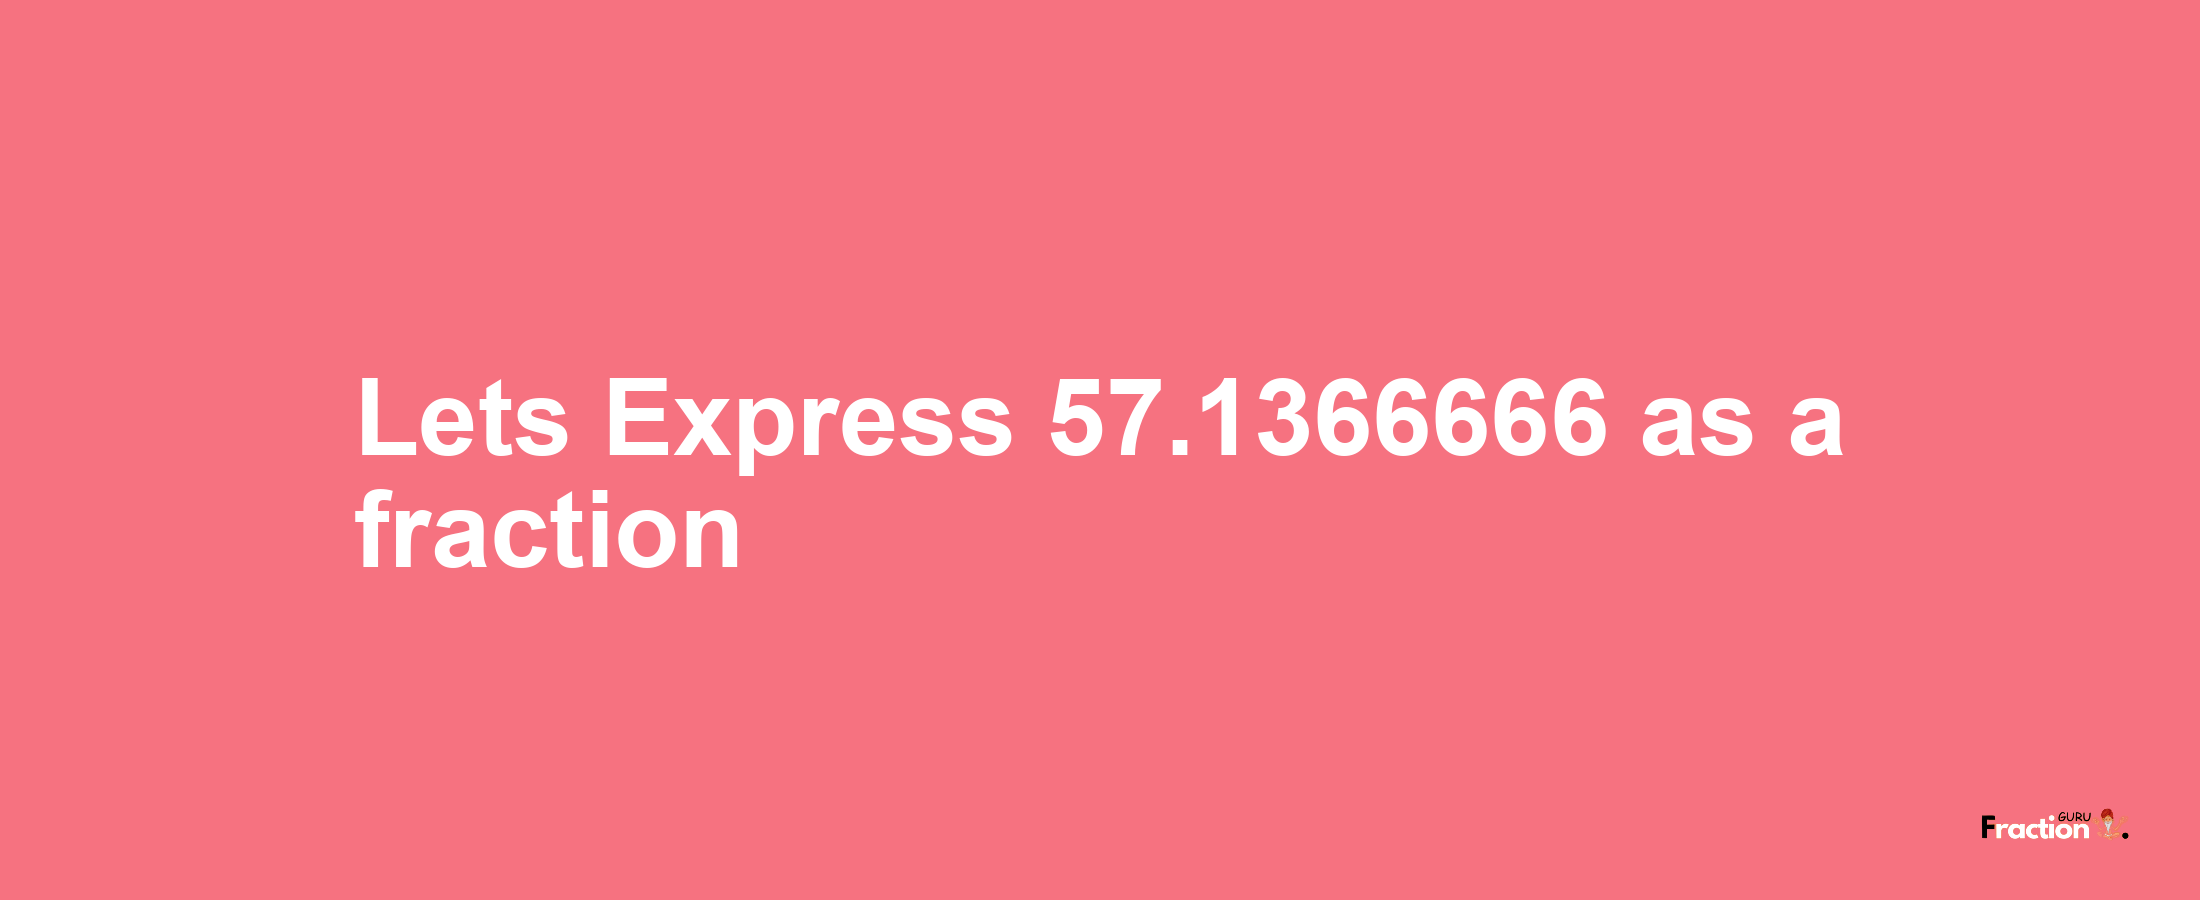 Lets Express 57.1366666 as afraction